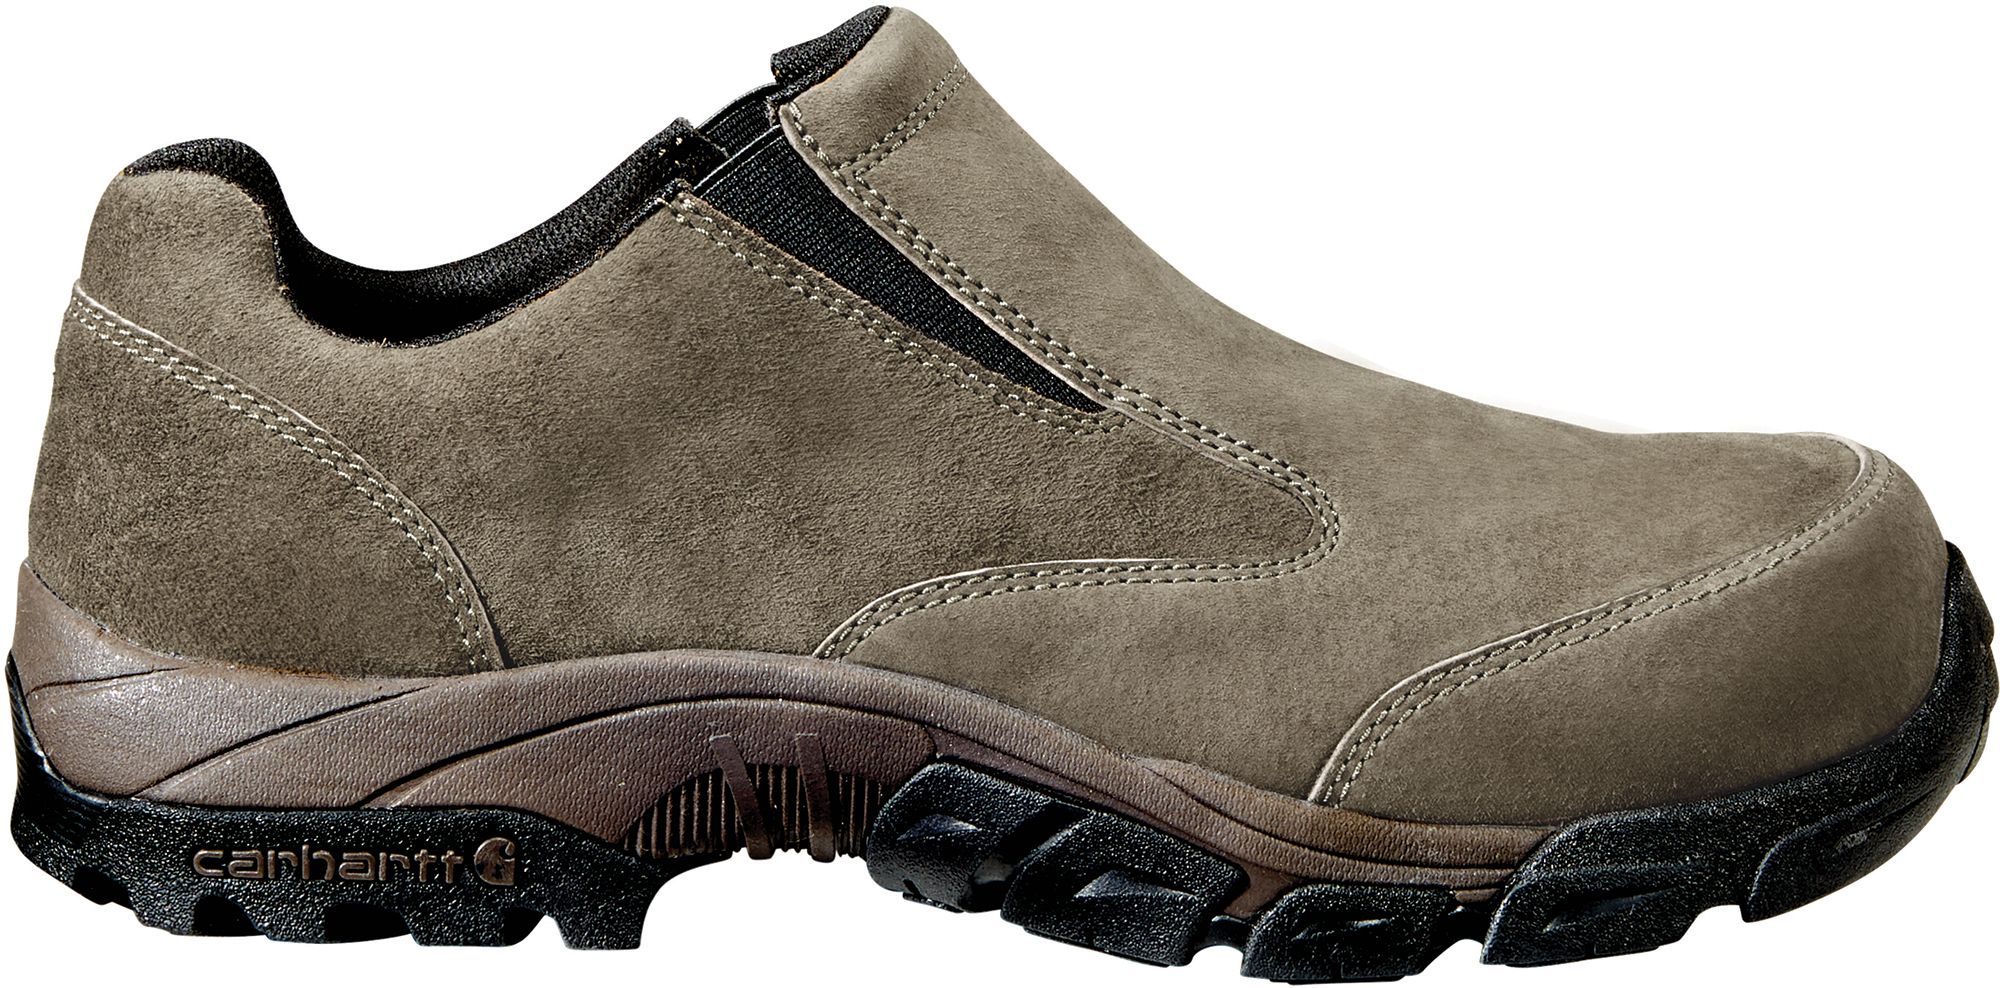 carhartt safety shoes